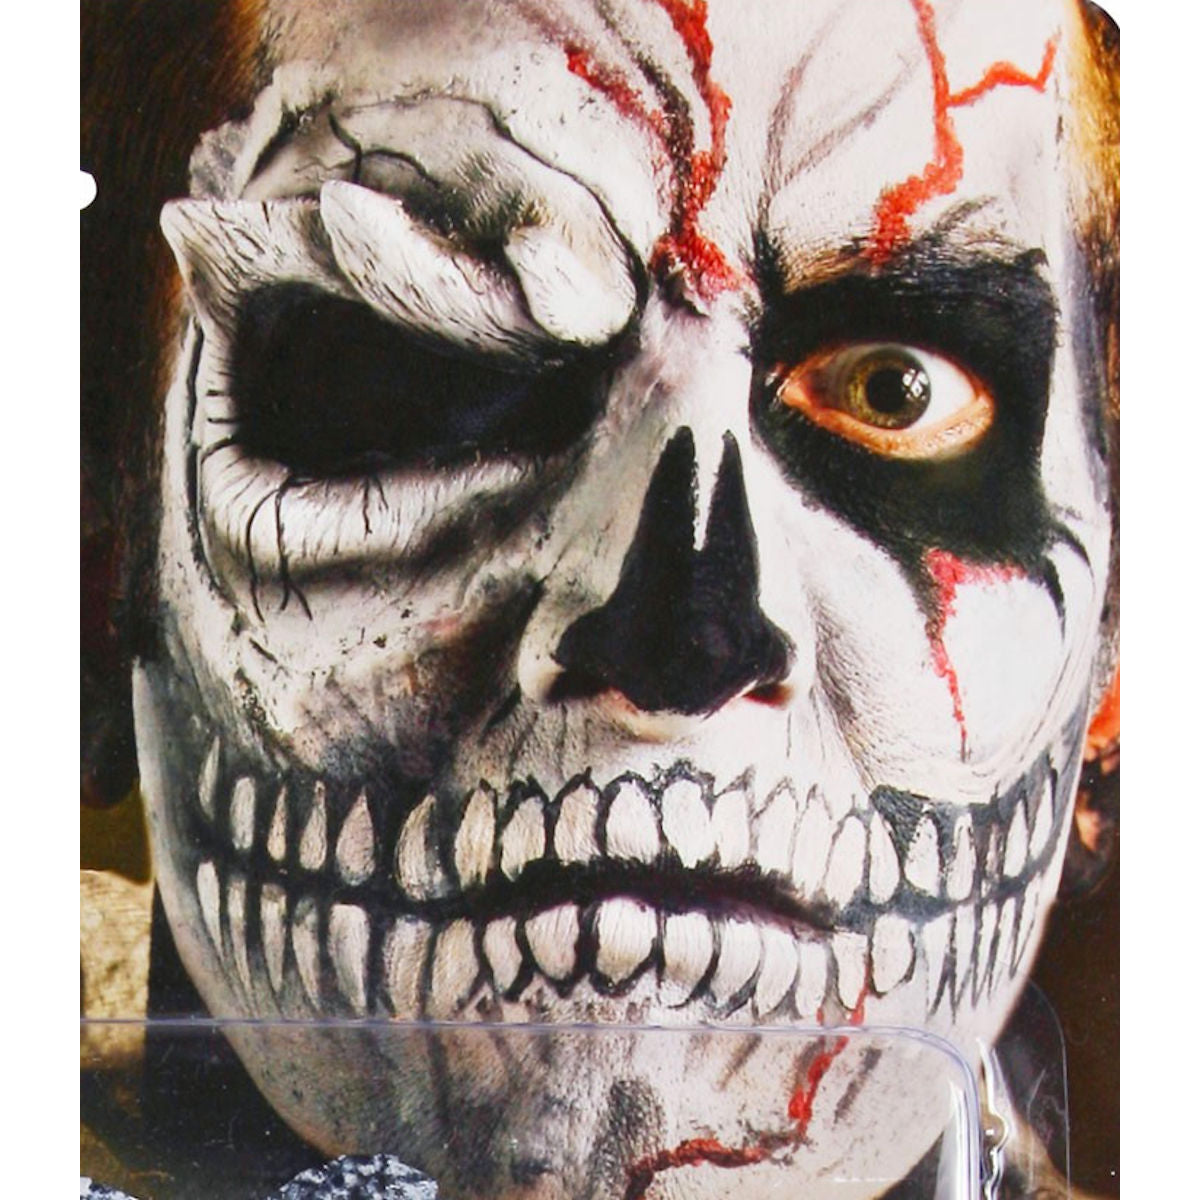 Skull Zombie Missing Eye Makeup Special FX Kit Halloween Costume Accessory